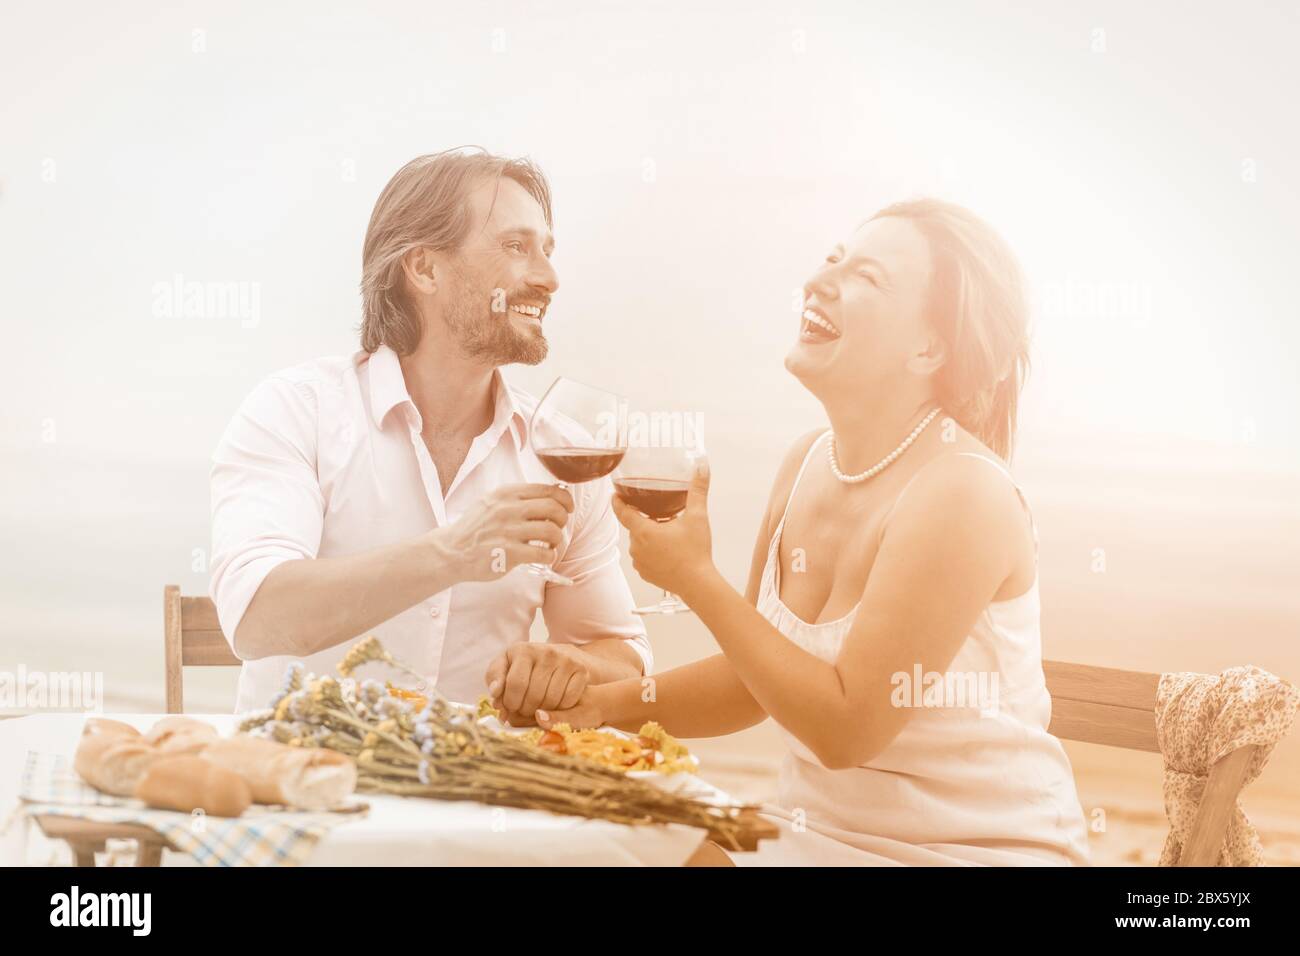 Happy man and woman drink wine in beach cafe. Lovely couple laughing holding hands and enjoying life while sitting together outdoors. Romantic midlife Stock Photo